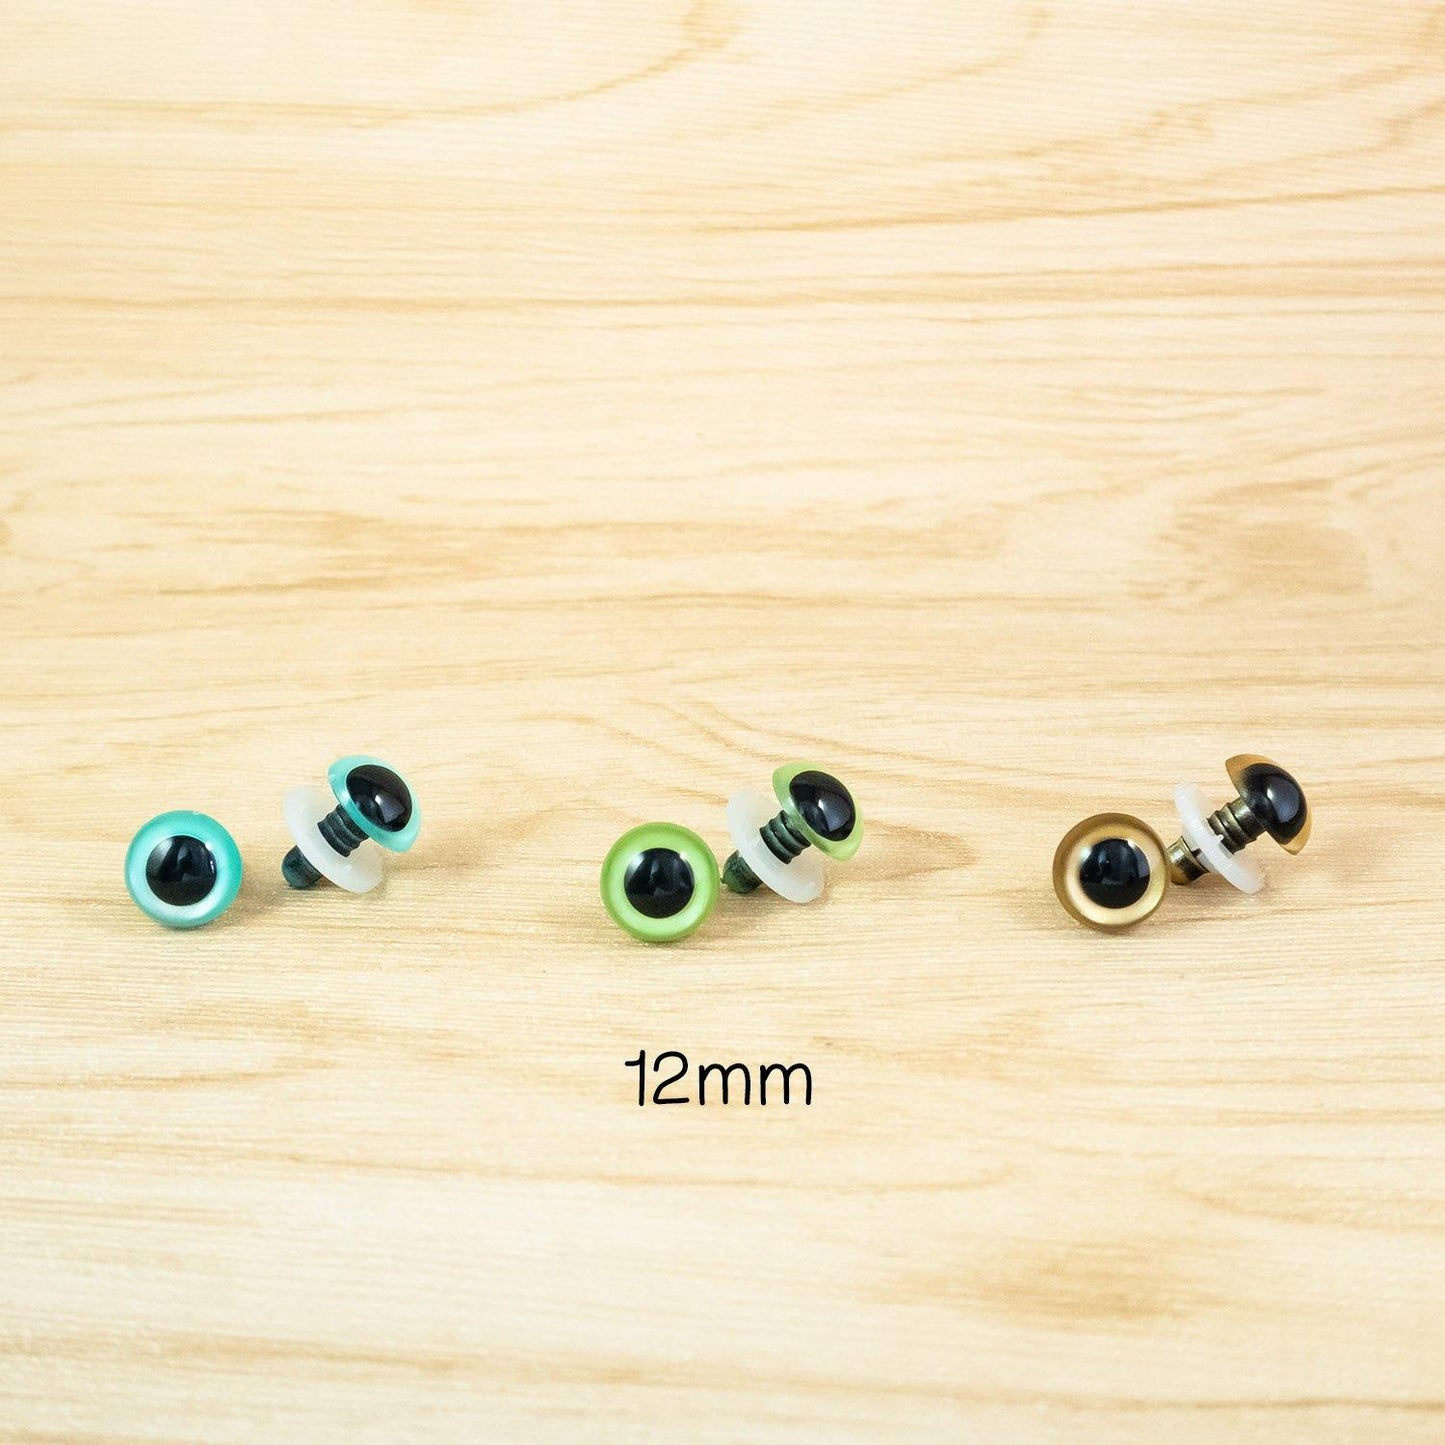 12mm color safety eyes for amigurumi and handmade plush - Pearl Green, Pearl Blue, Gold